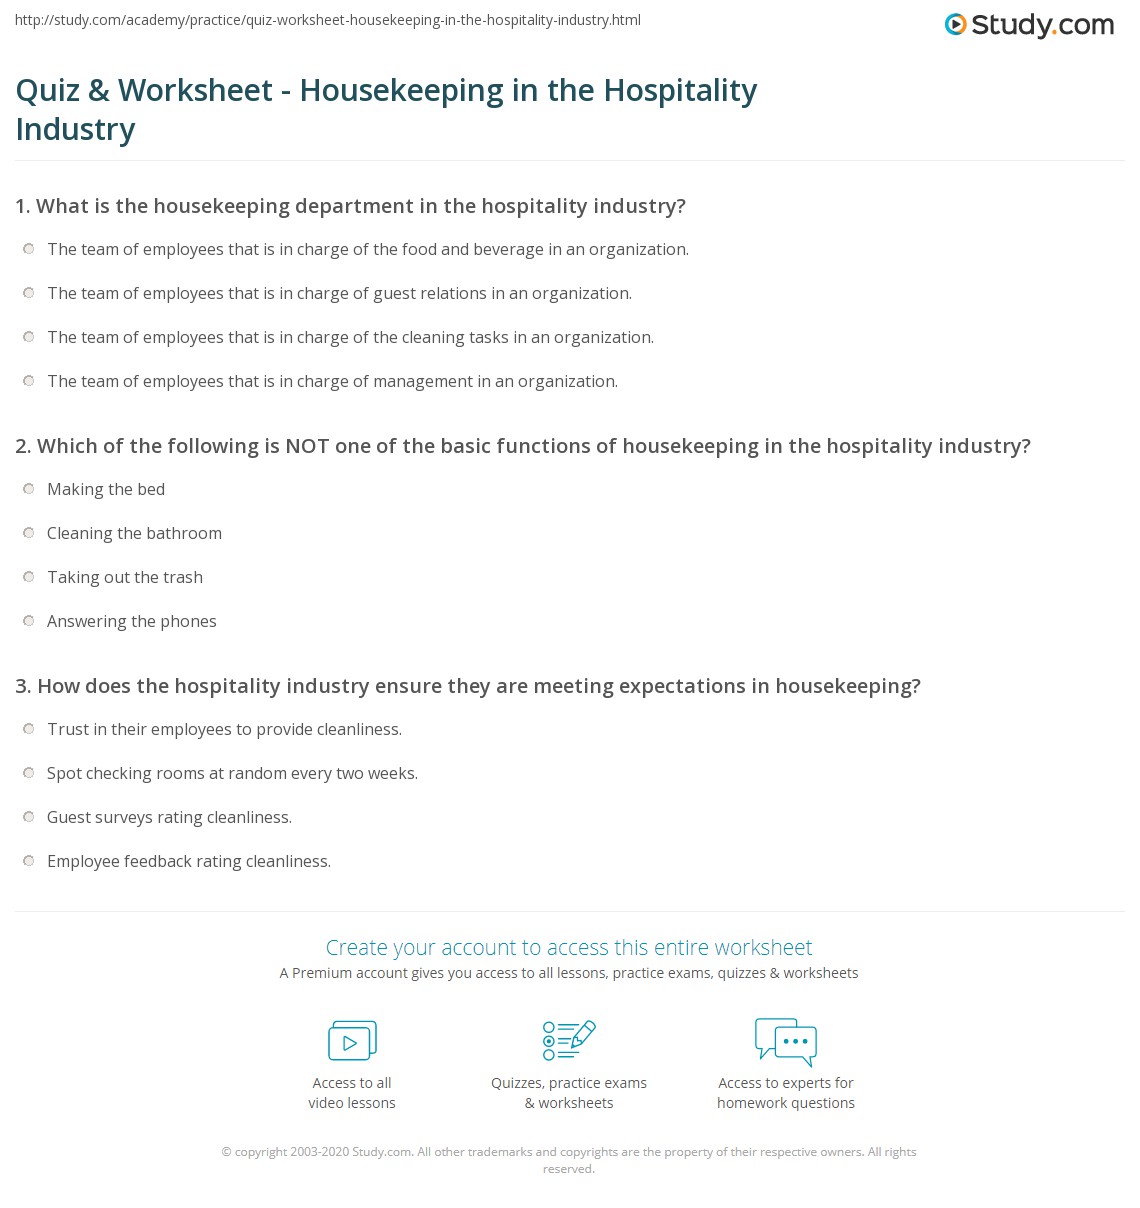 housekeeping quiz questions and answers